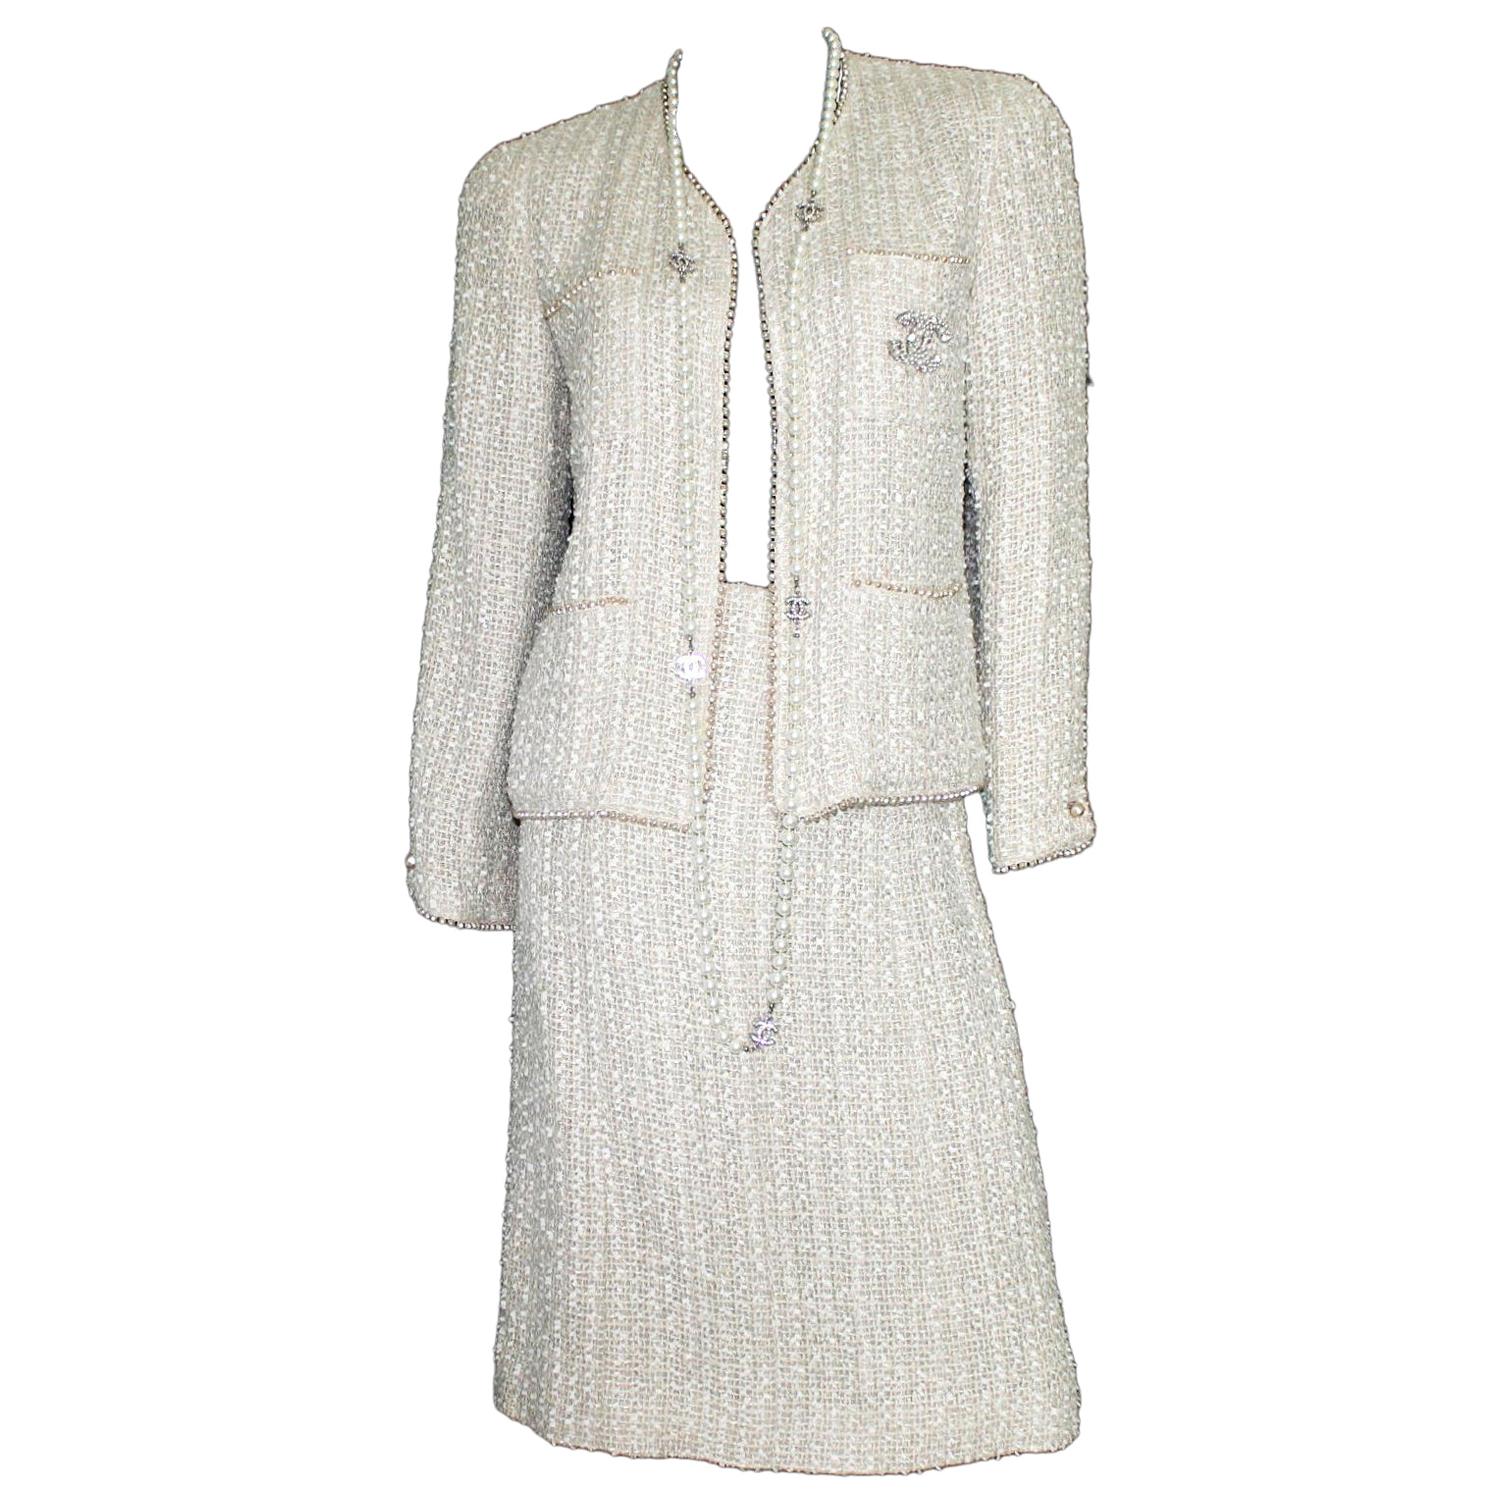 Chanel Rare Ivory Fantasy Tweed Skirt Suit with Pearl Trimming Details 38